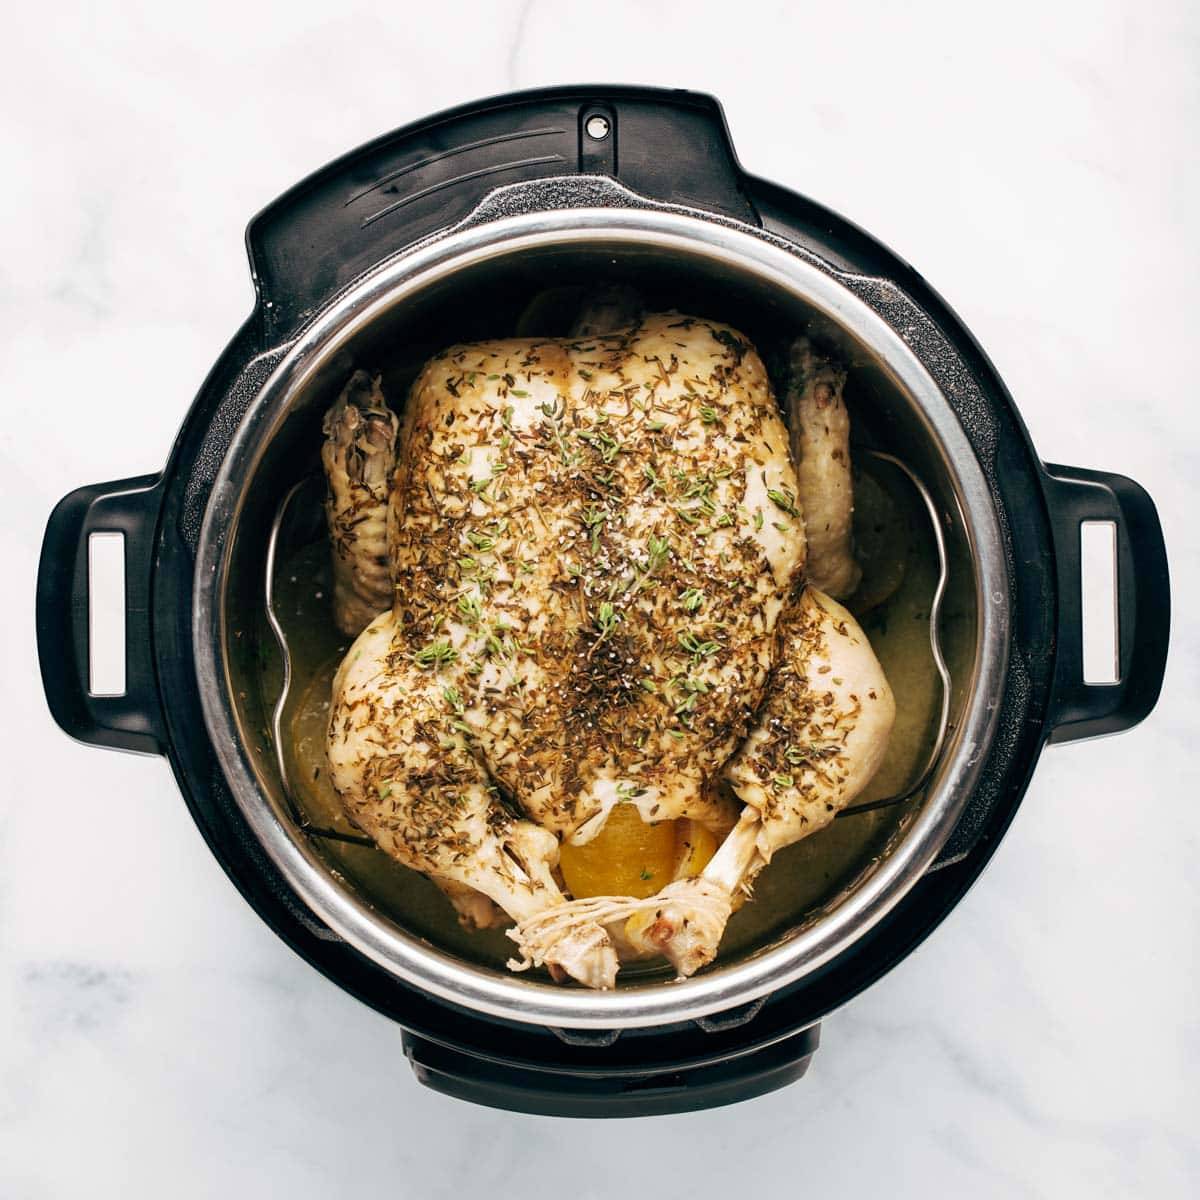 Cooked whole chicken in the Instant Pot.